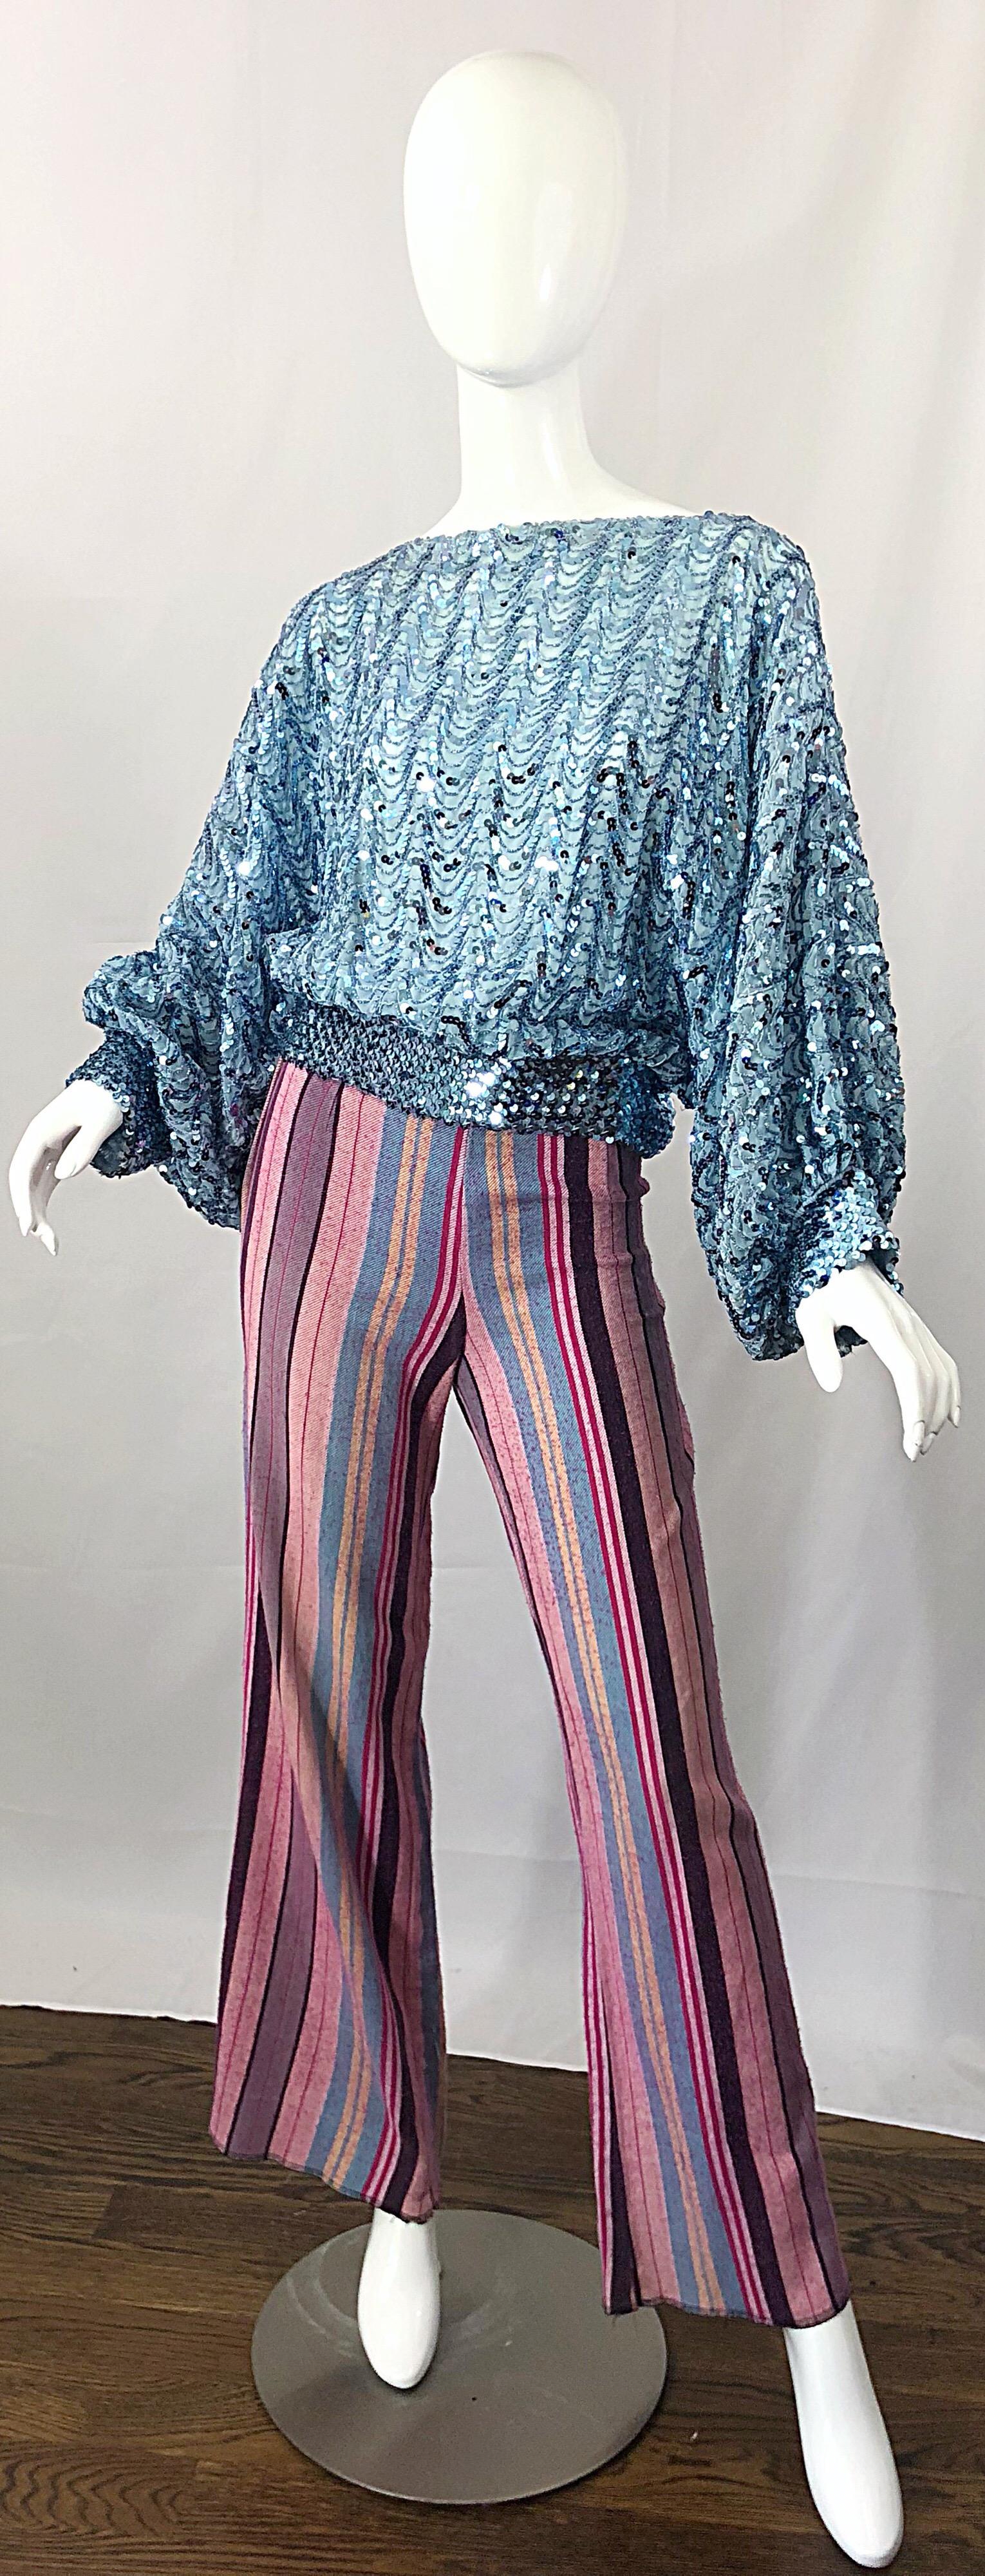 Fabulous 1970s High Waisted Pink + Blue Striped Vintage 70s Bell Bottoms Pants In Good Condition For Sale In San Diego, CA